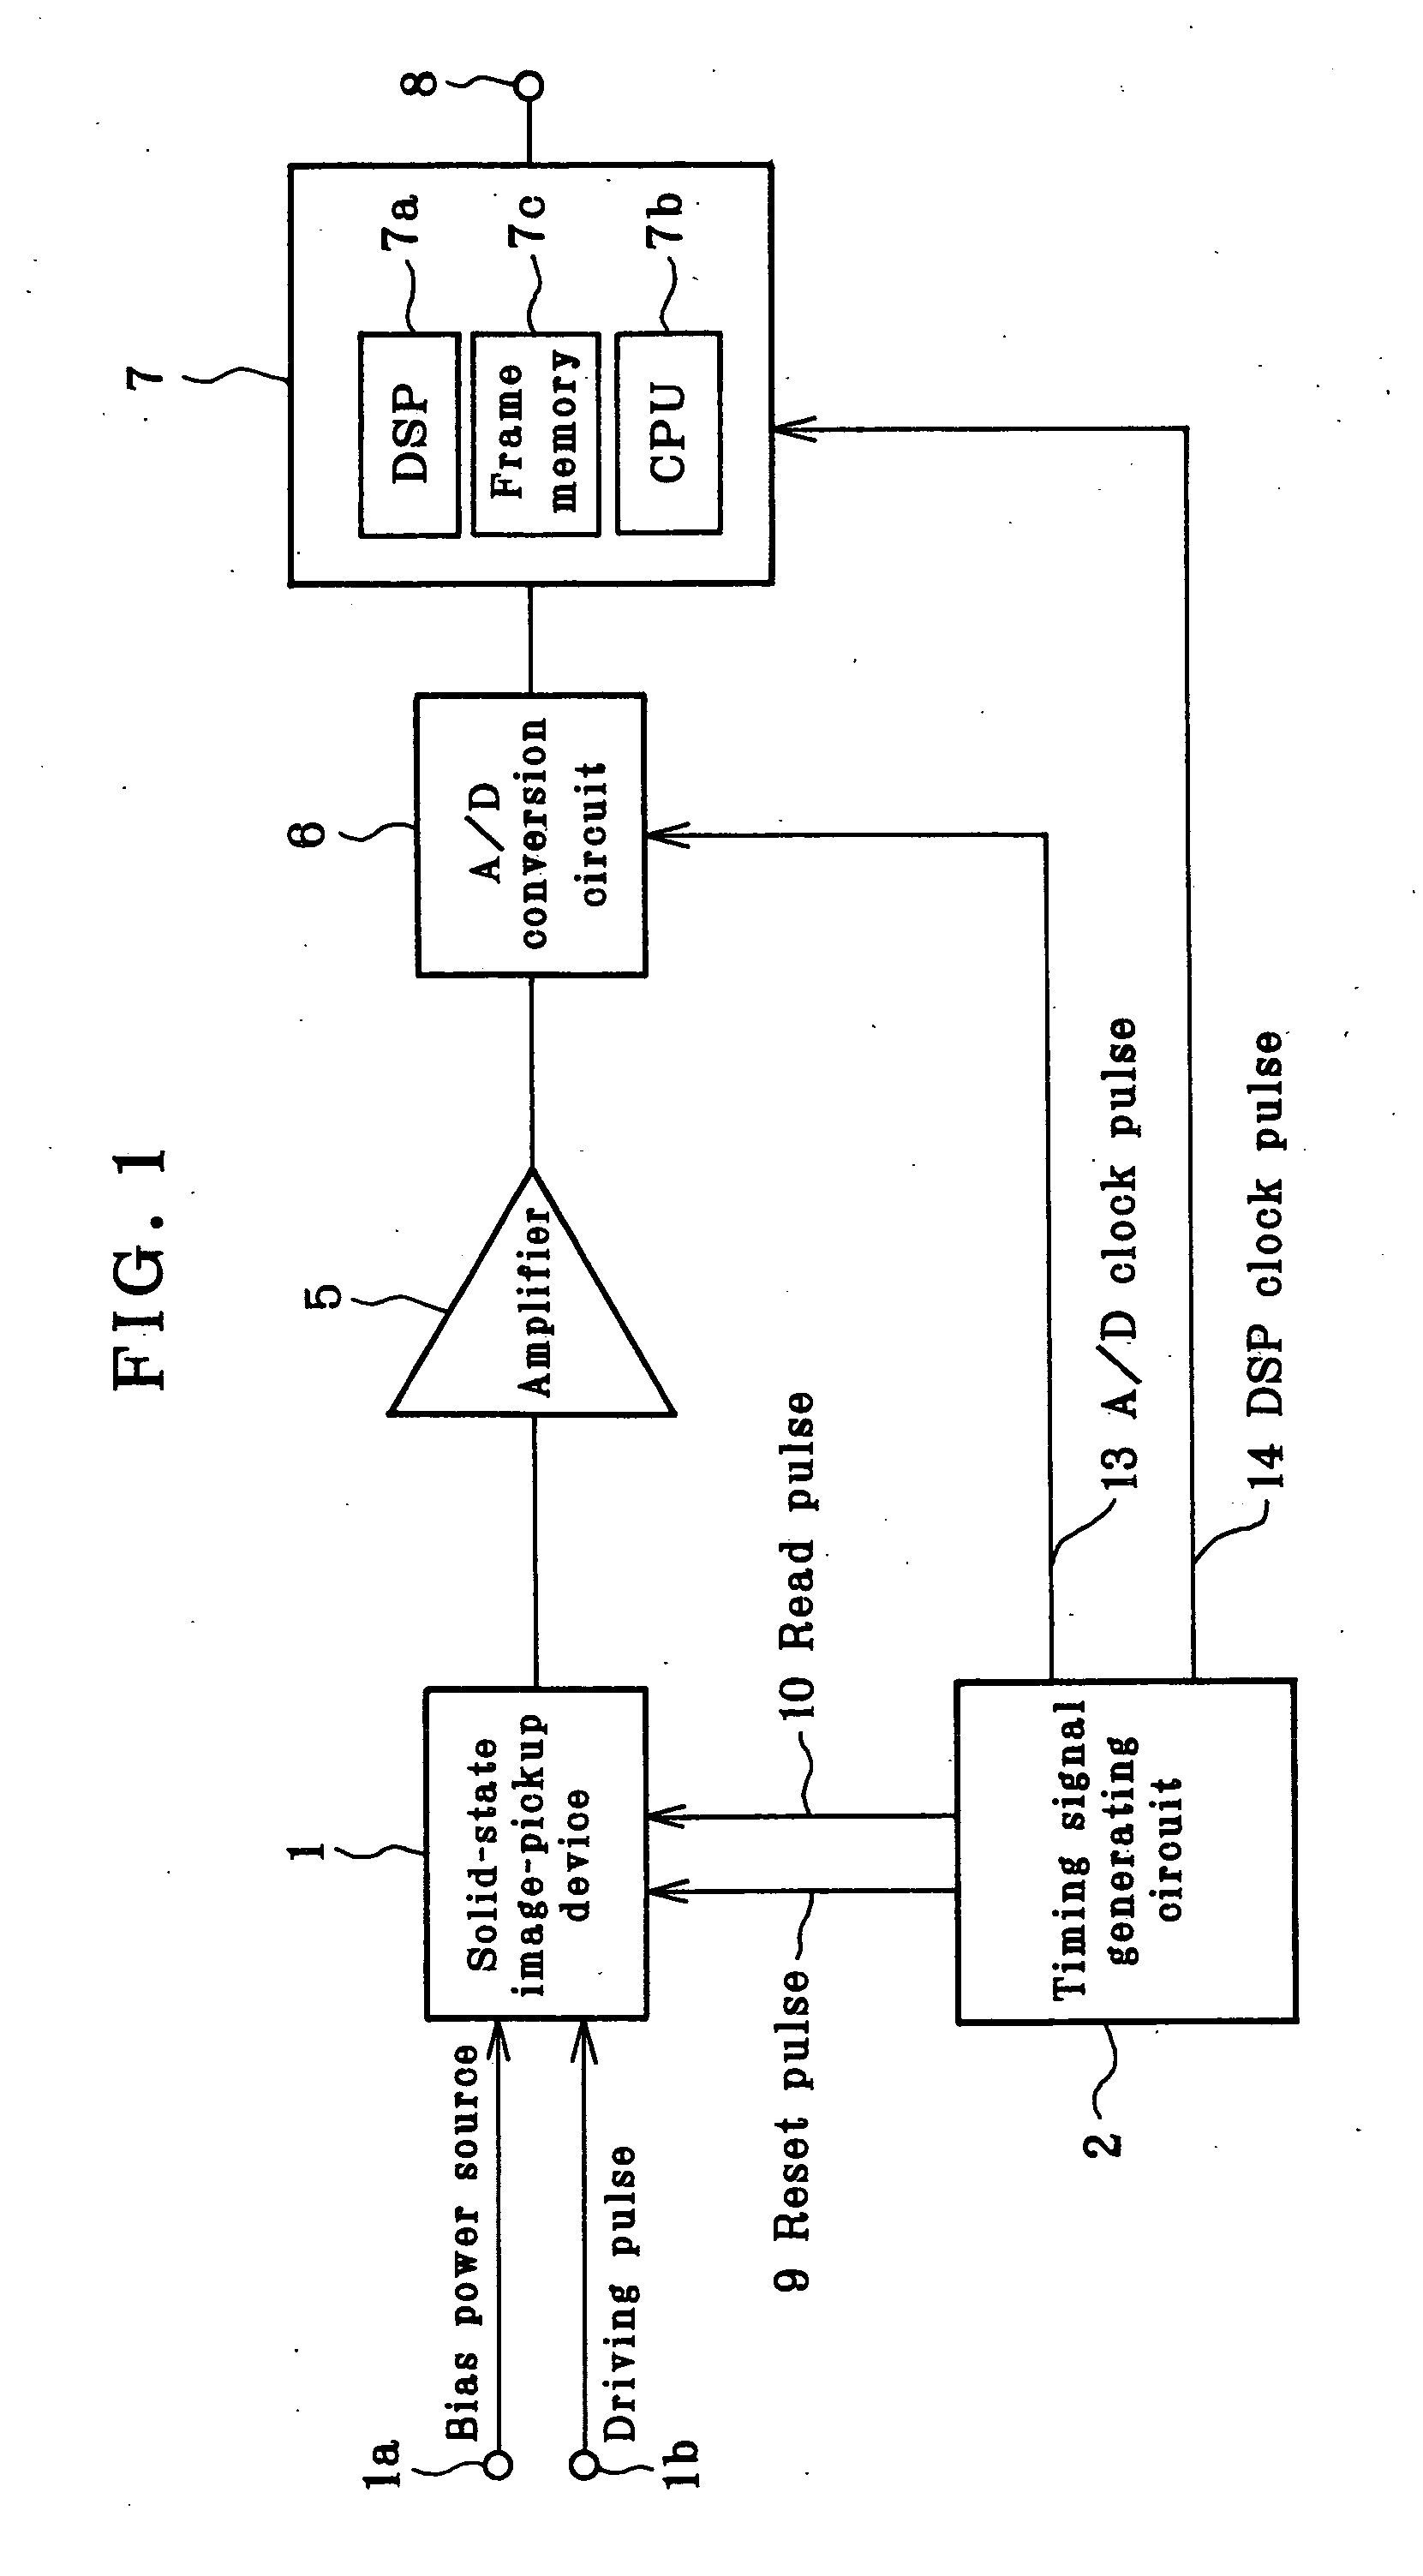 Solid-state image-pickup device signal processing apparatus